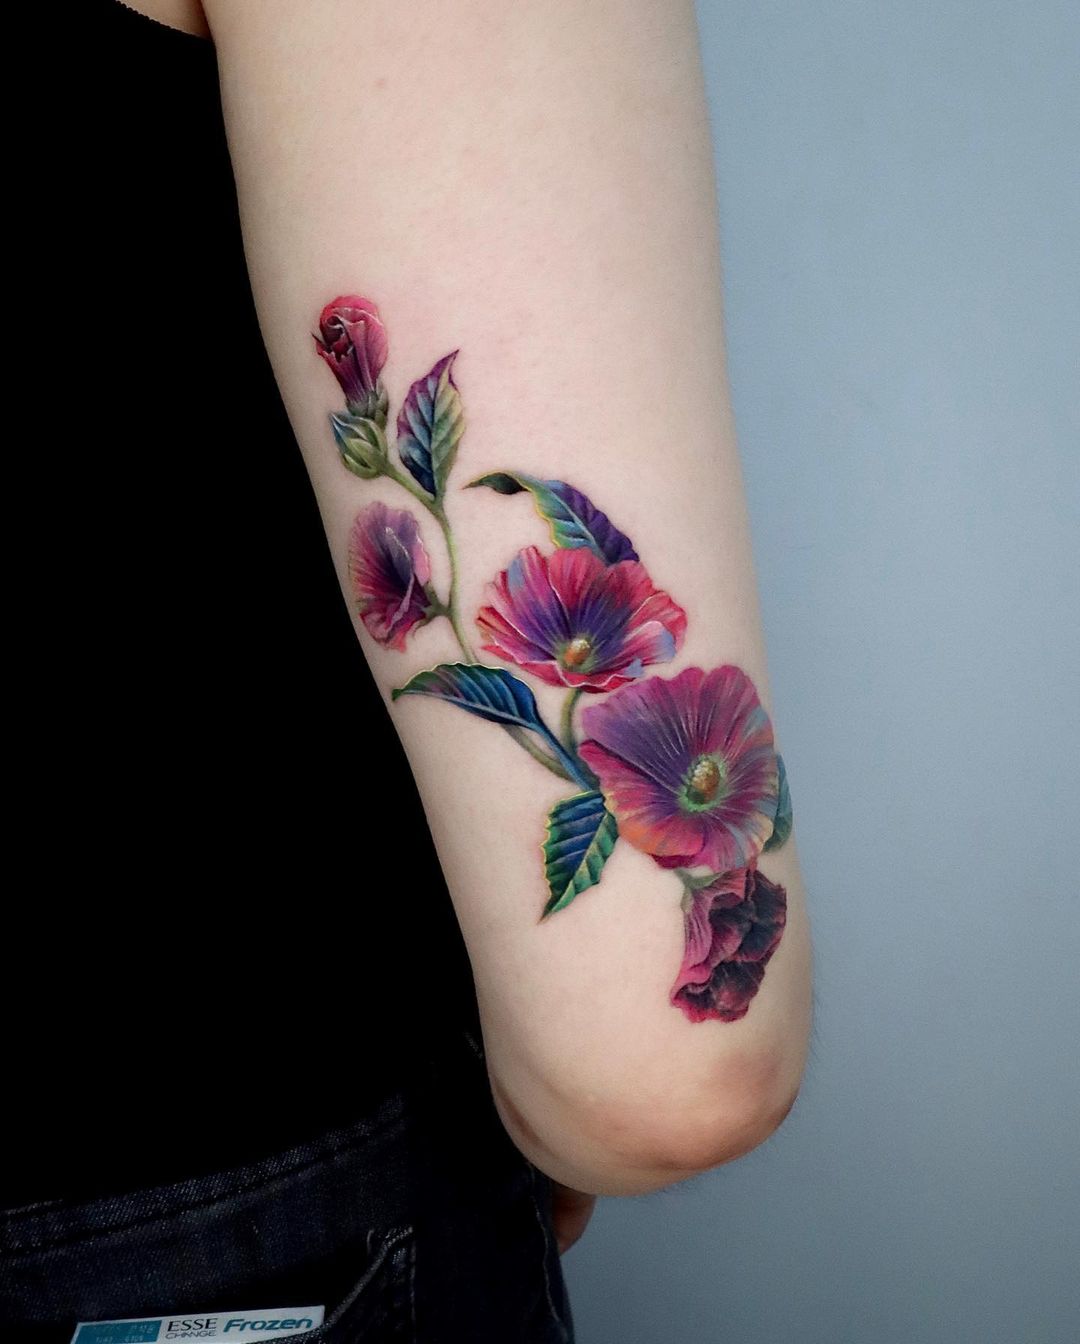 68 Relaxing Designs Of Daffodil Tattoos Currently On The Radar!